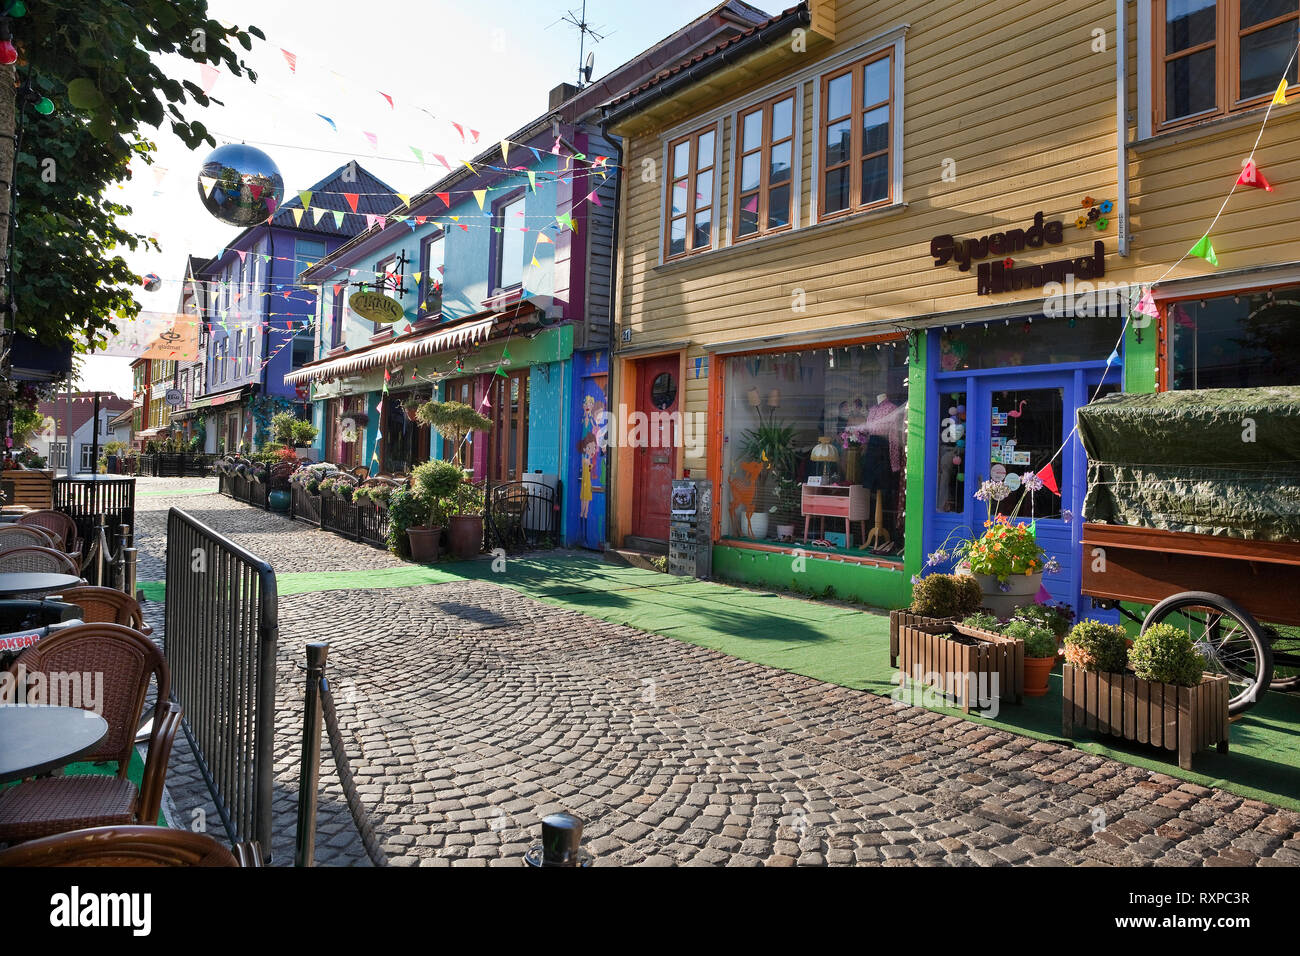 Ovre Homelgate, a popular street lined with boutiques, pubs and cafes, and where each building is painted in a different colour from the other. Stavanger, Norway Stock Photo